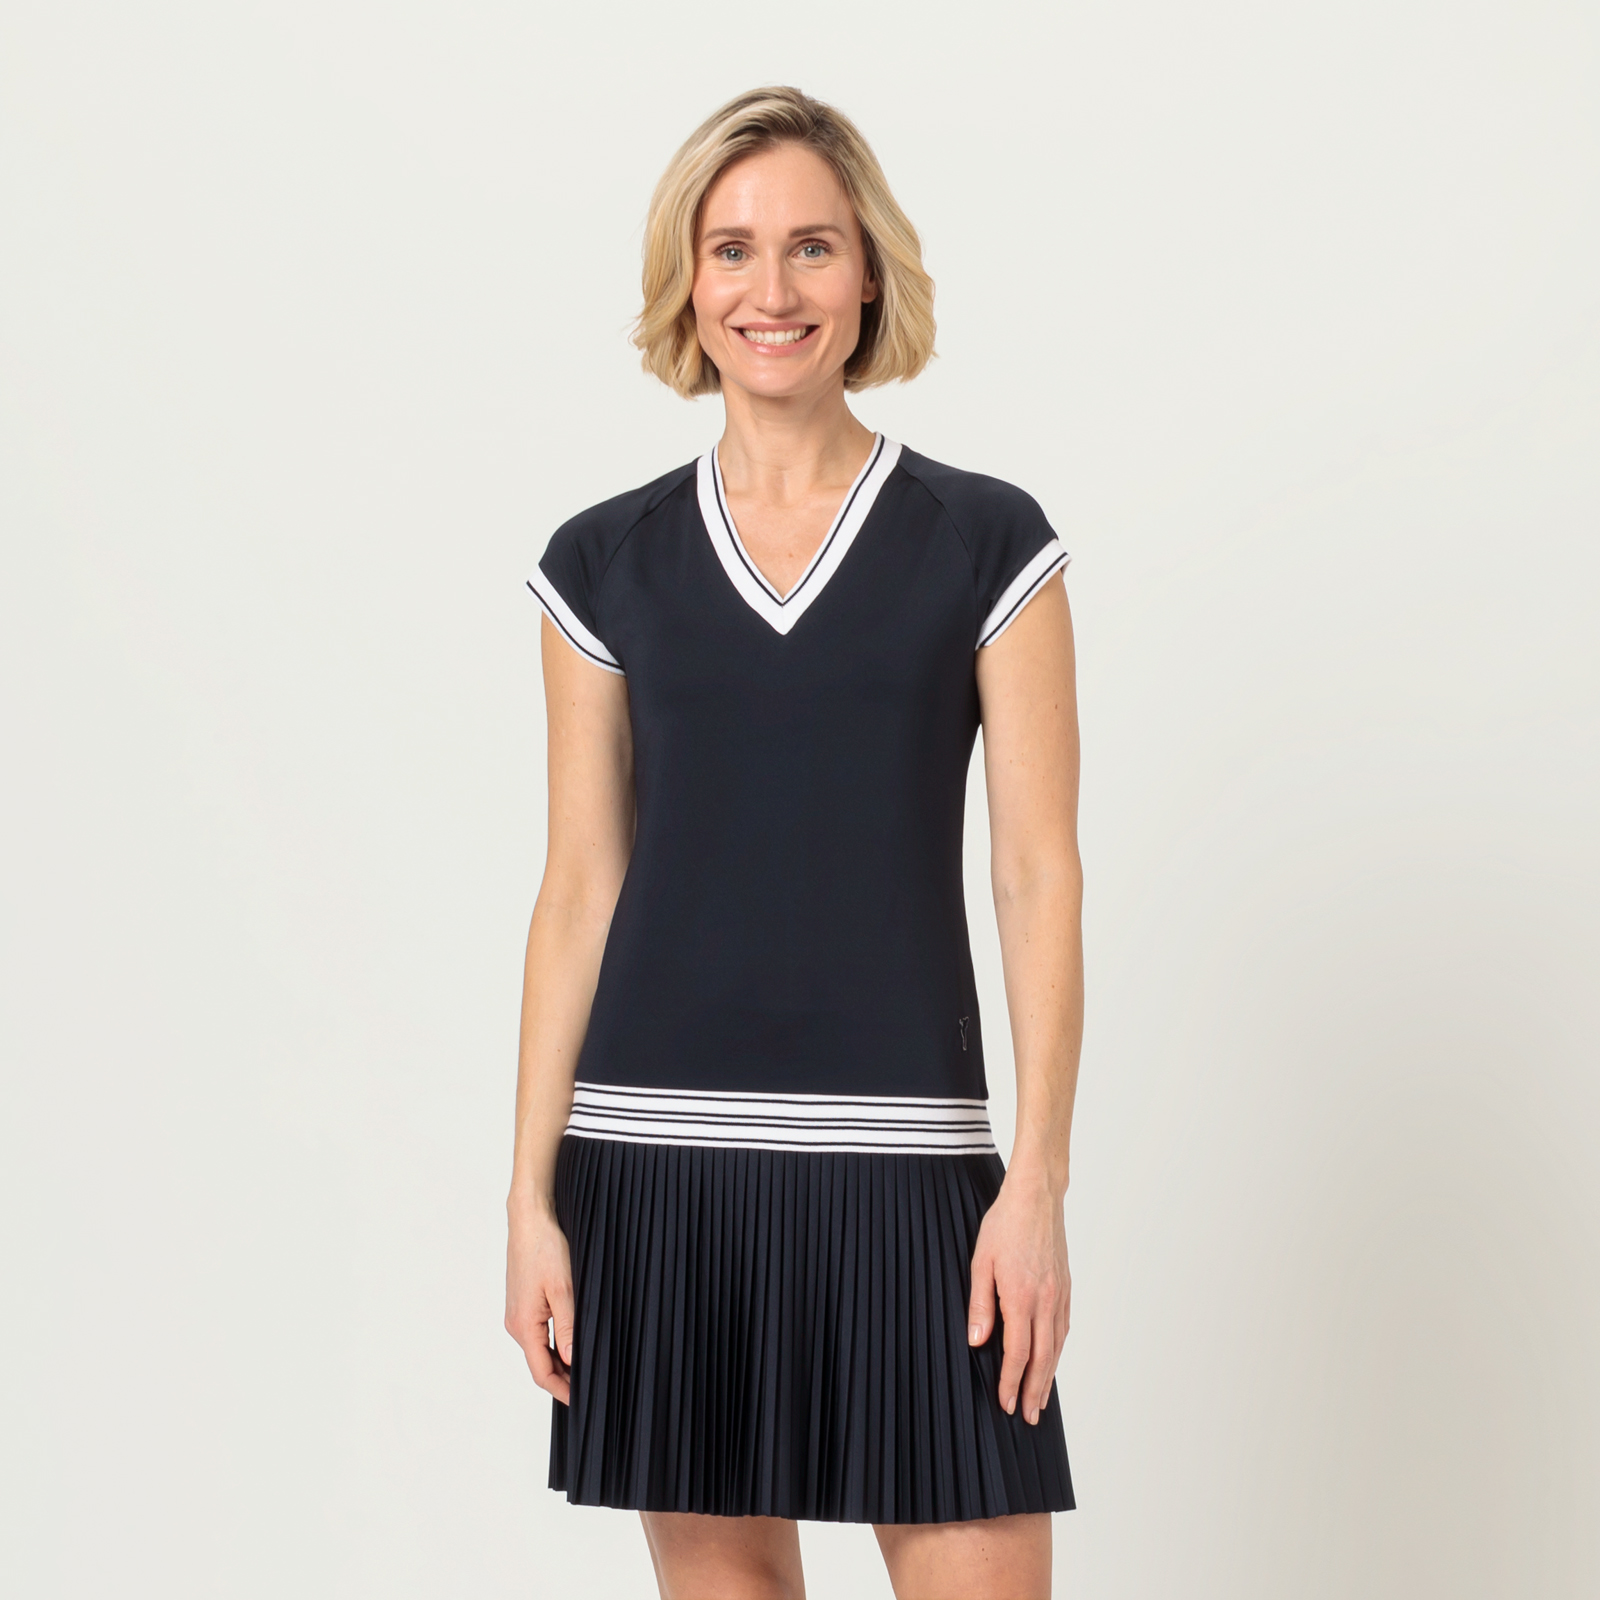 Ladies' charming golf dress with sun protection 